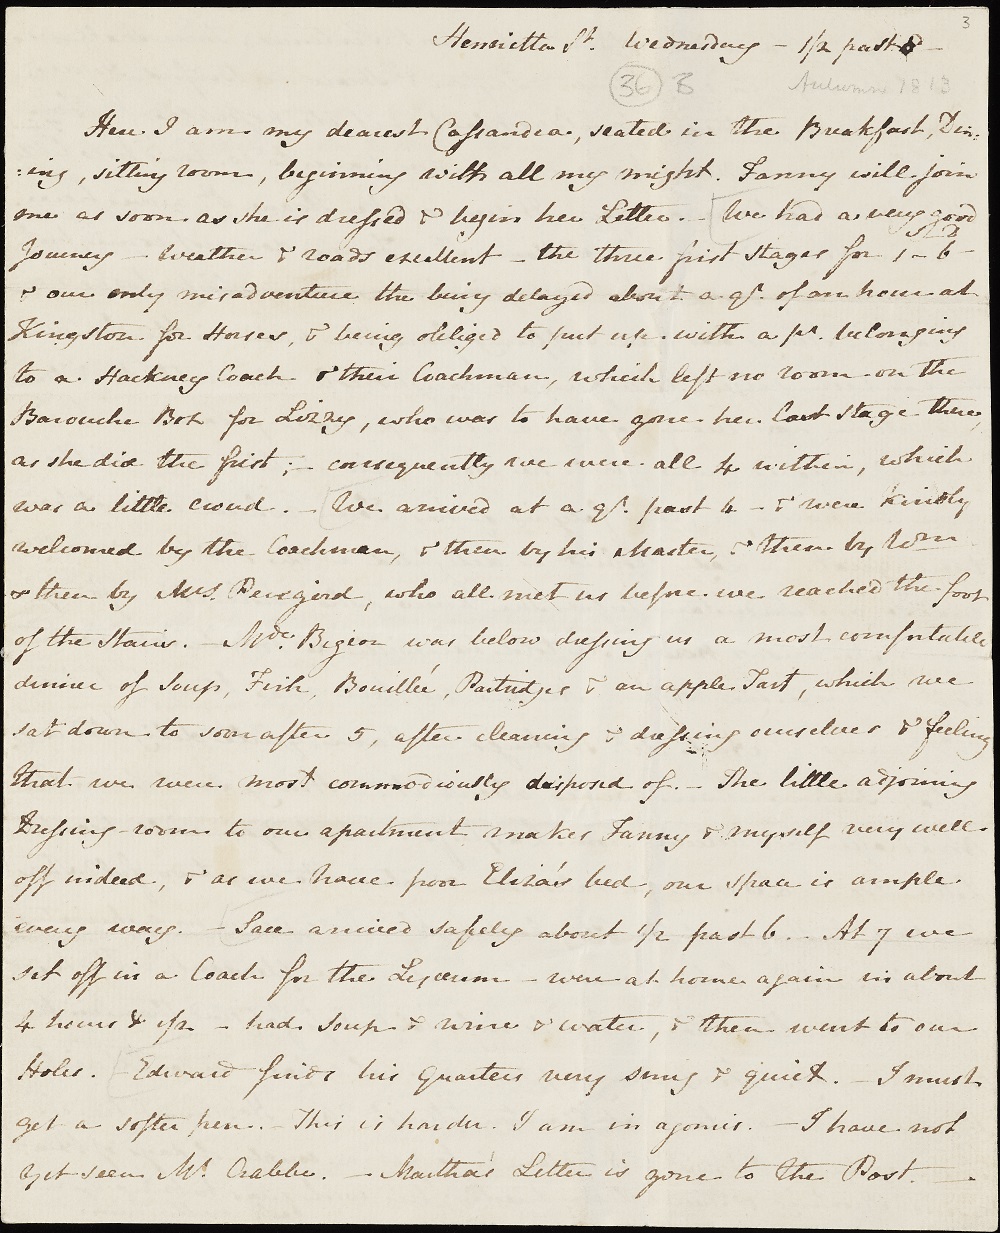 Page 1 of a letter from Jane Austen to Cassandra Austen 15th-16th September 1813